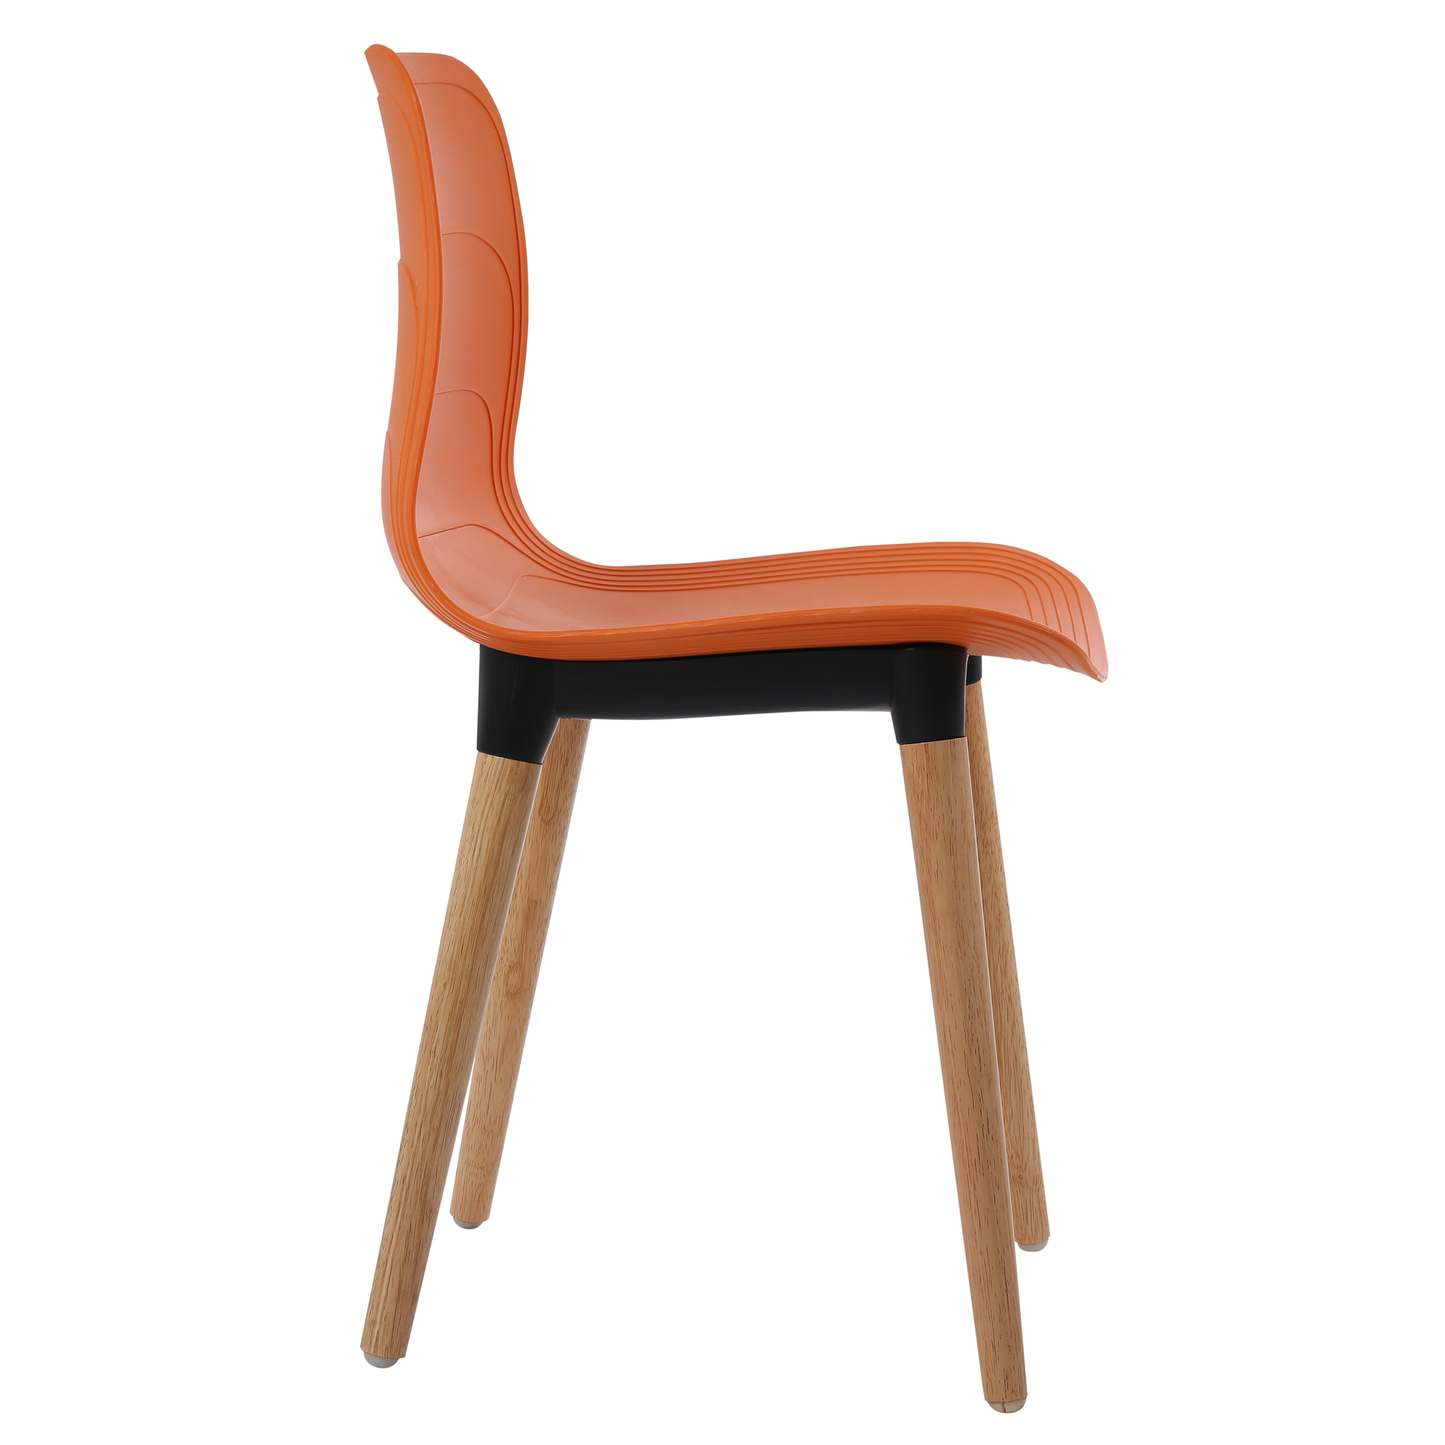 Plastic Chairs With Wood Legs For Cafe and Dining HIFUWA-G (Orange)